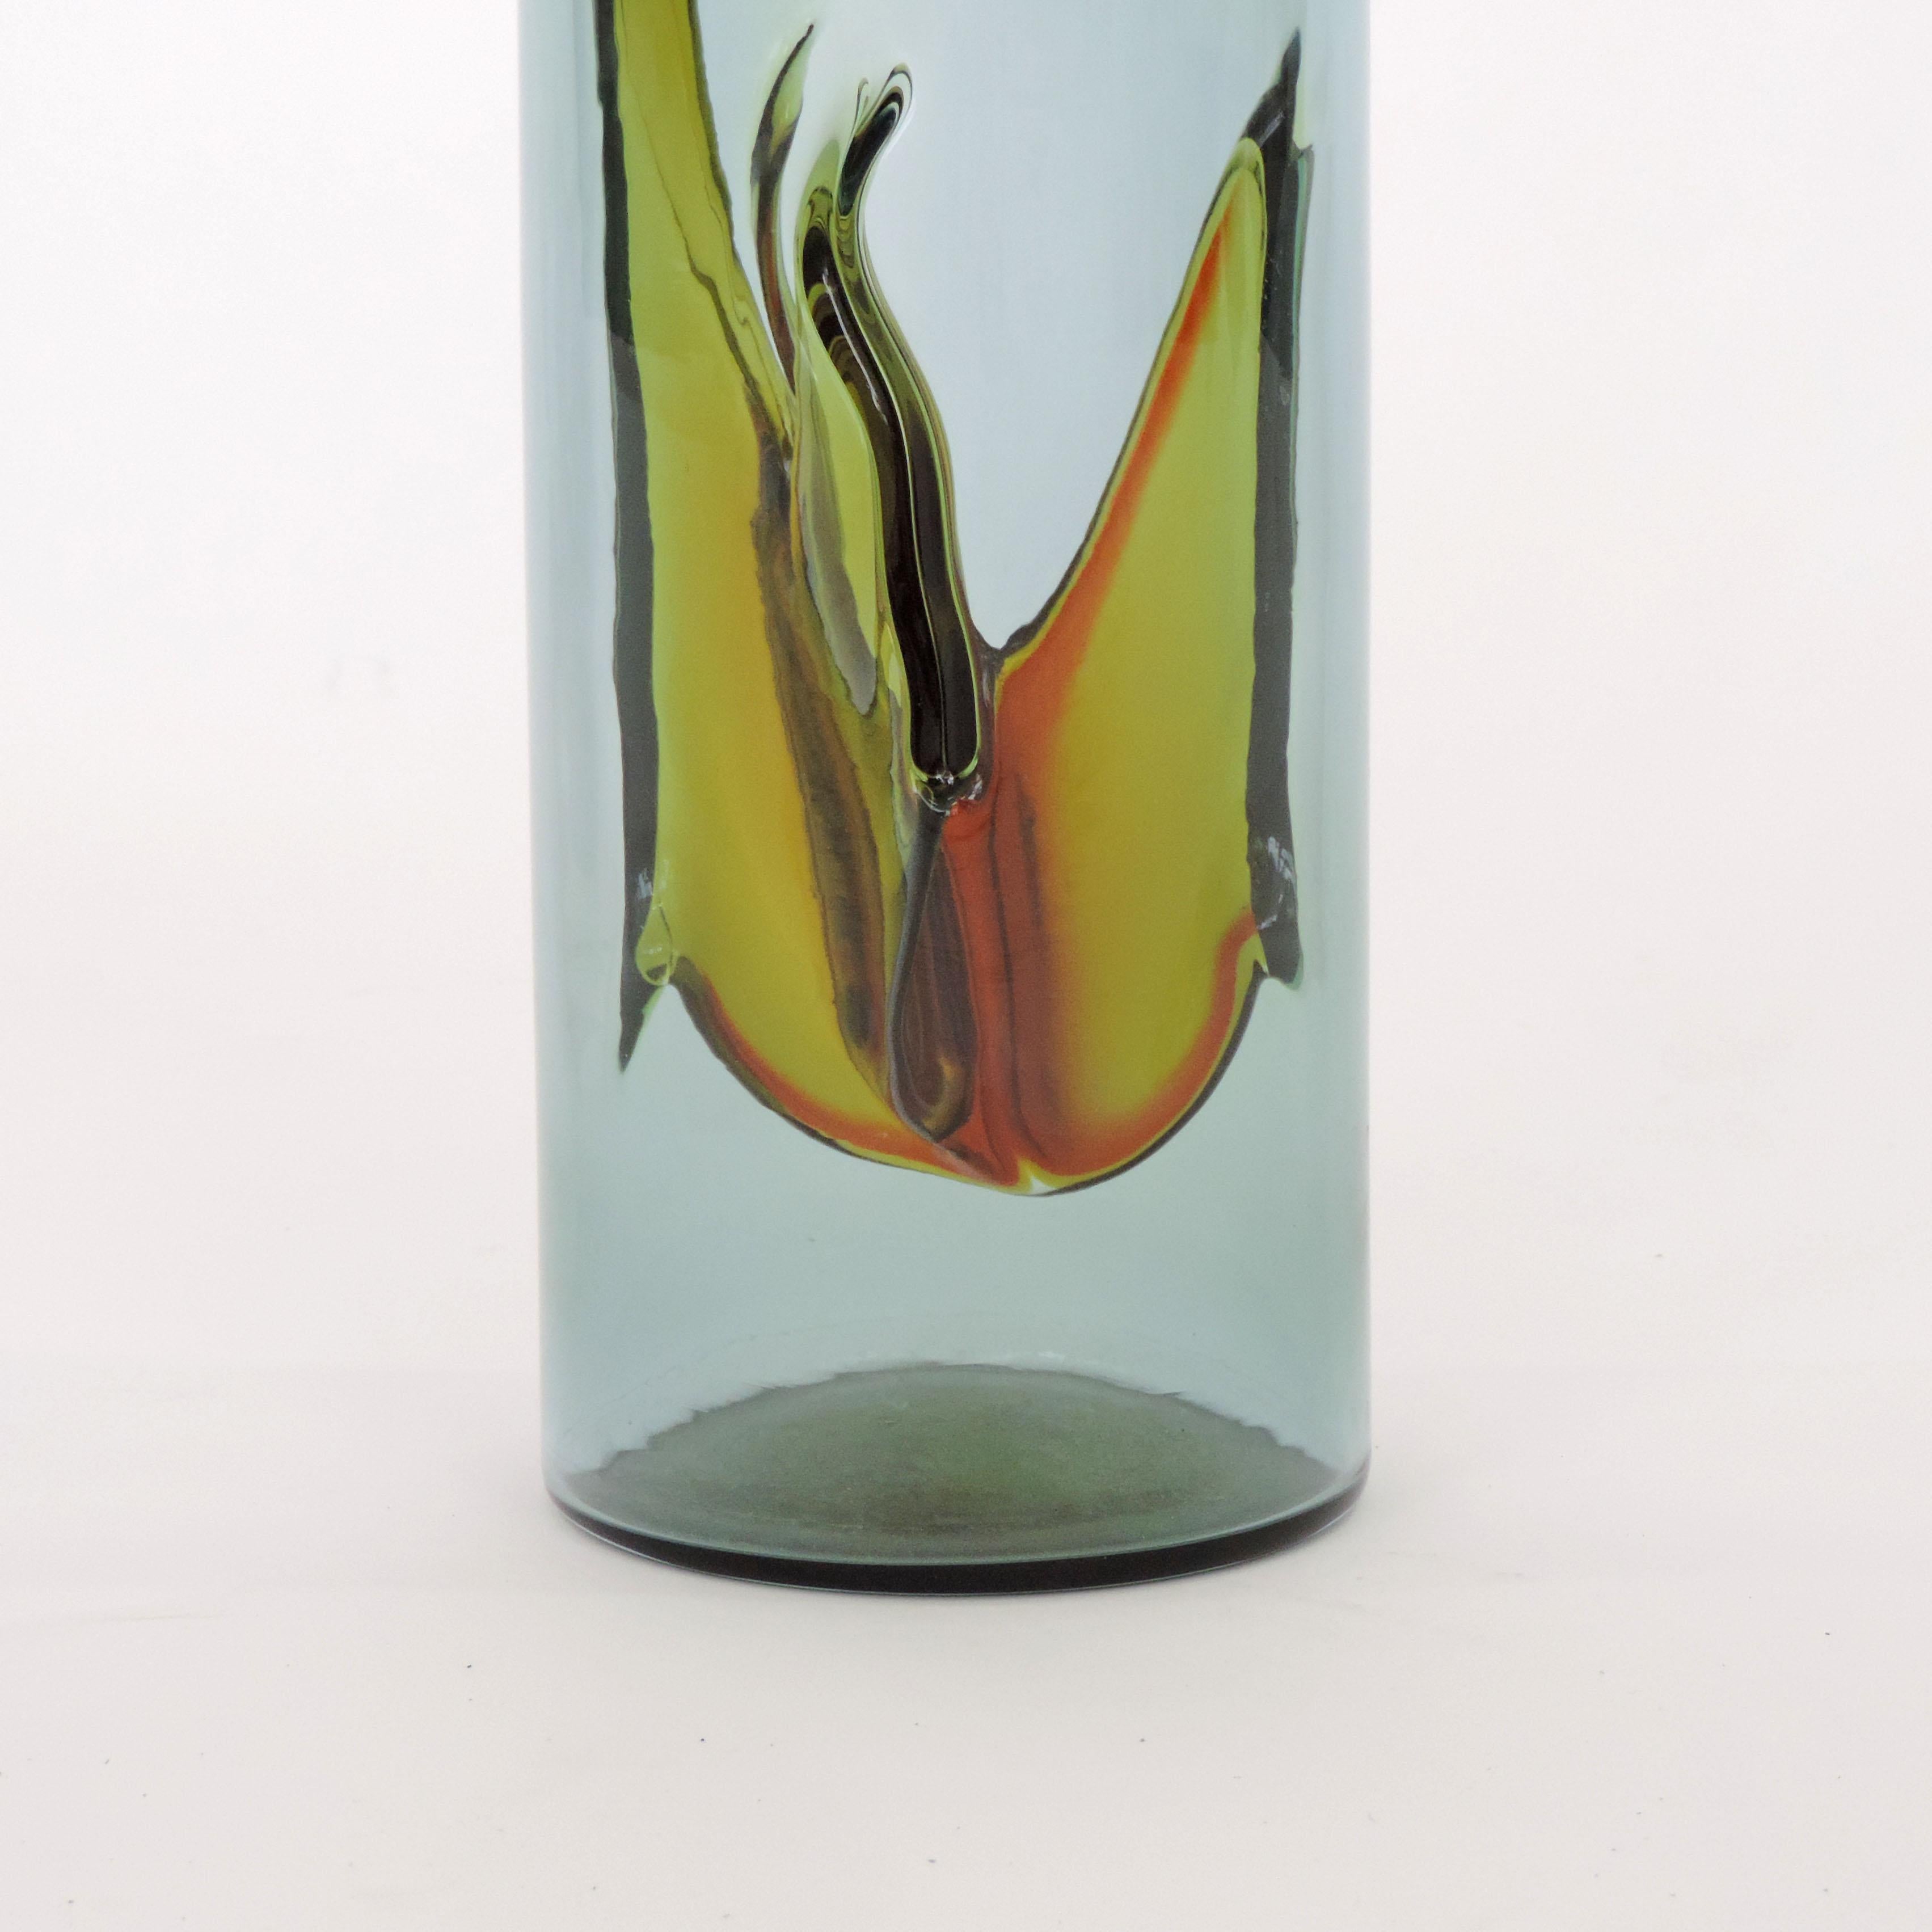 Toni Zuccheri Murano vase for VeArt.
Italy, 1970.
Blown Murano glass with inclusions.